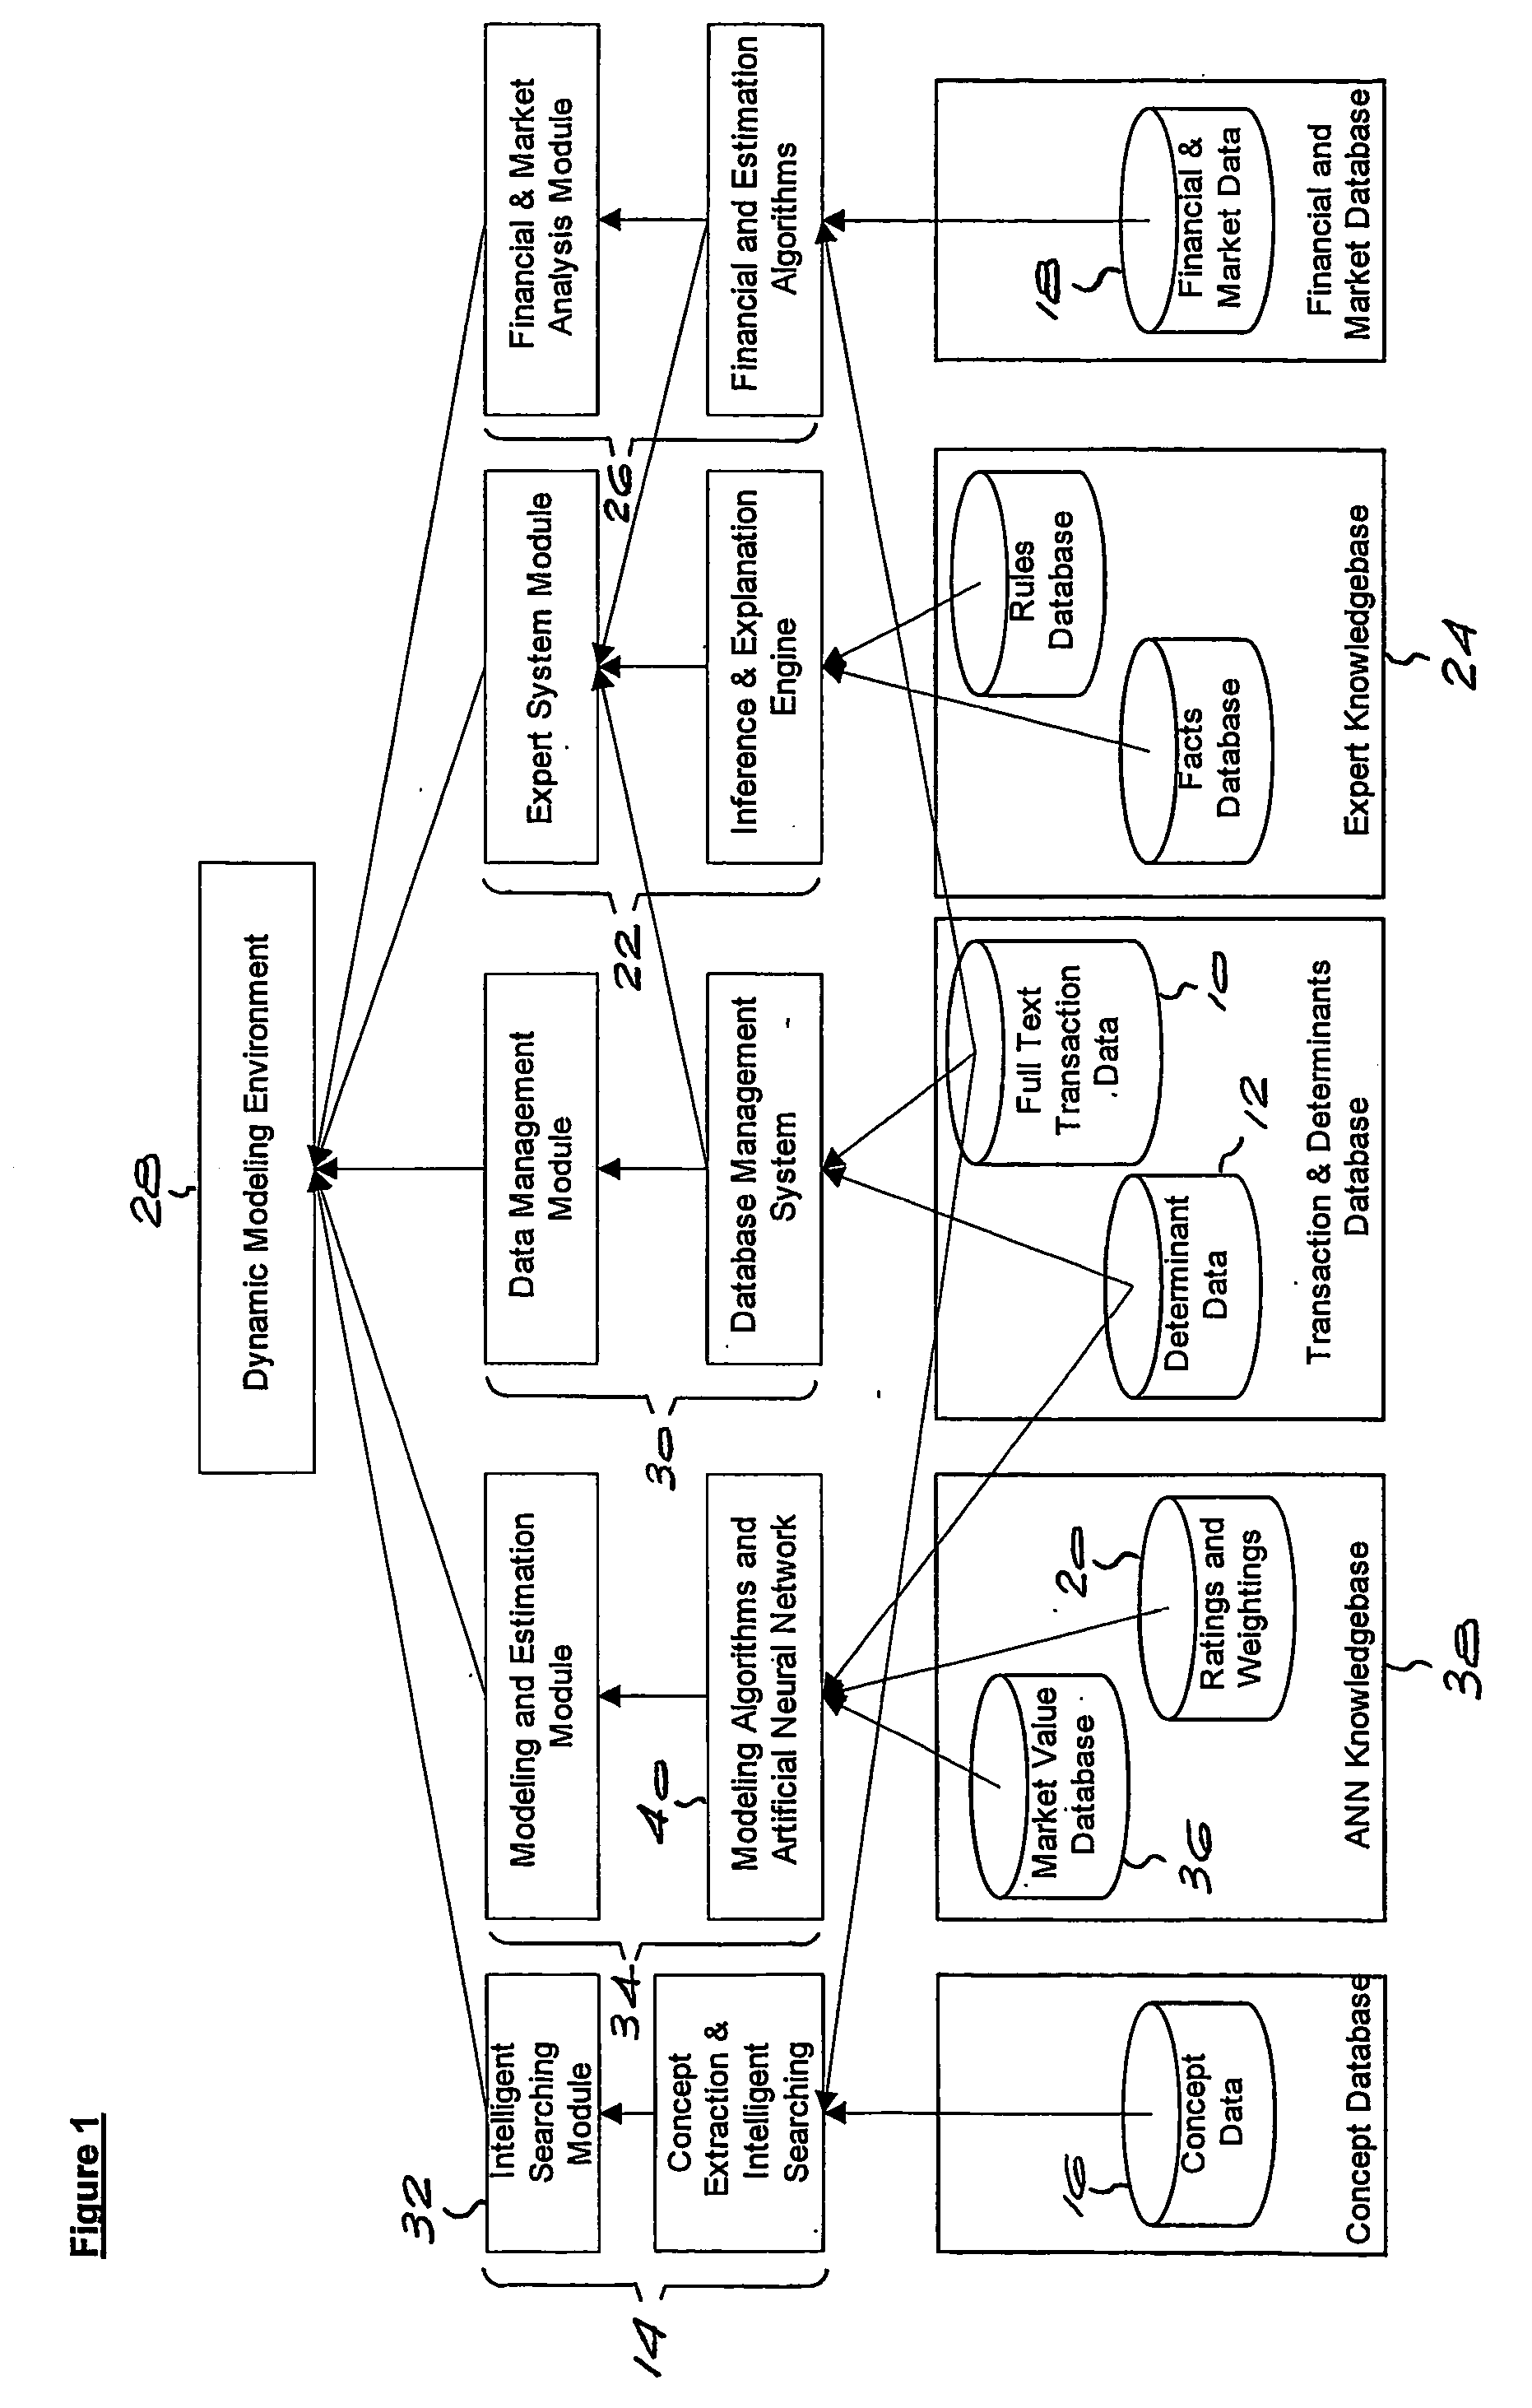 Method and system for valuing intellectual property